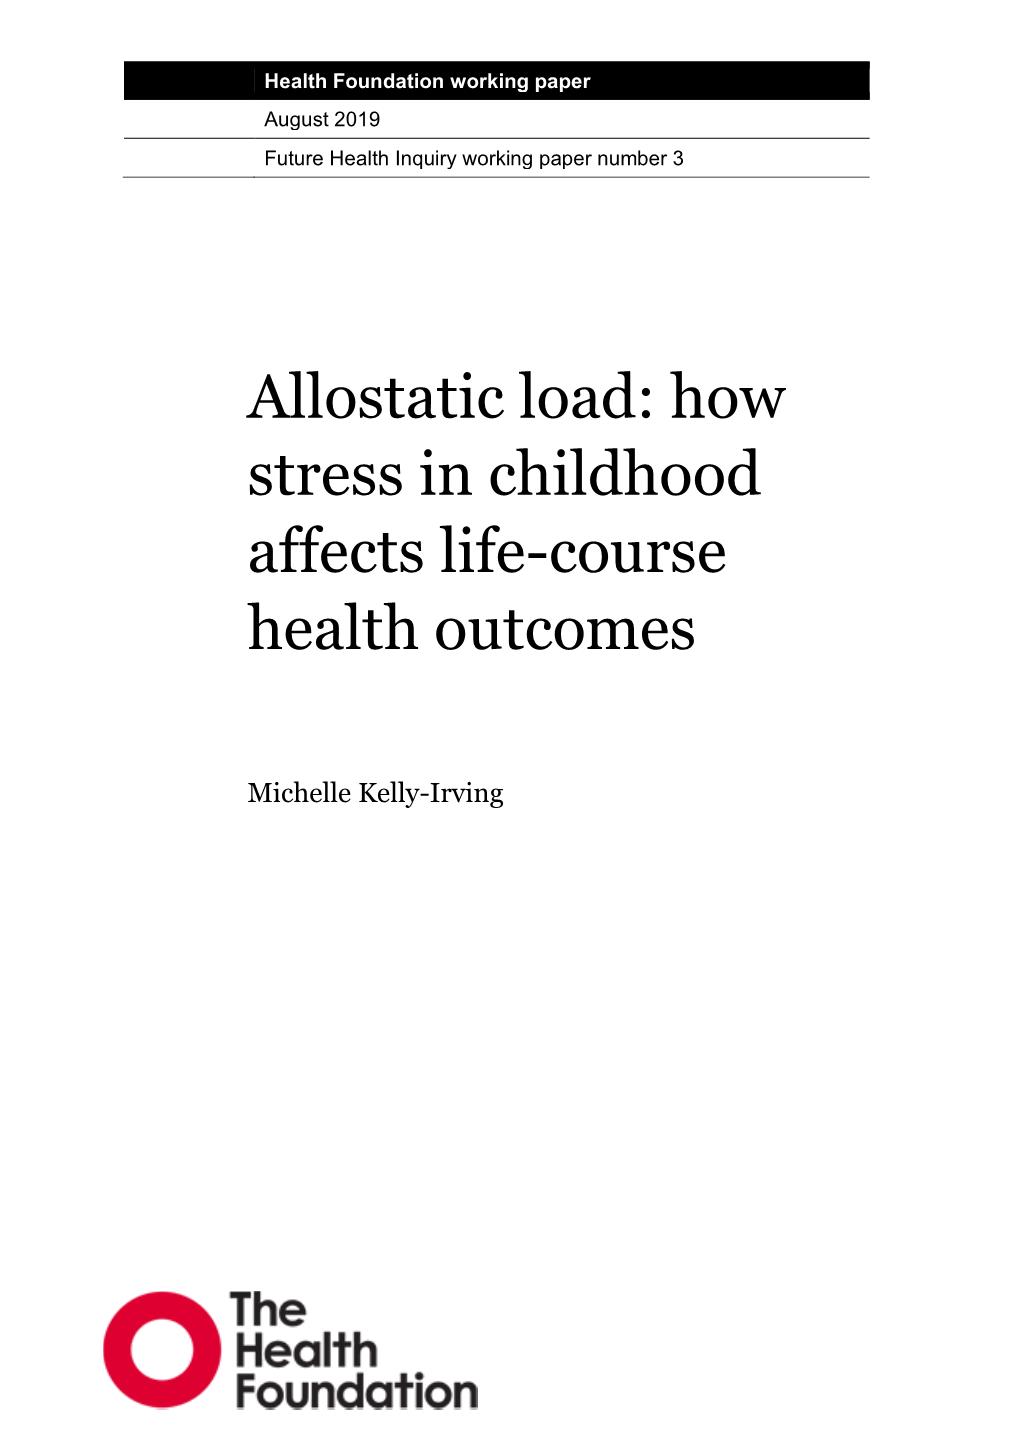 Allostatic Load: How Stress in Childhood Affects Life-Course Health Outcomes